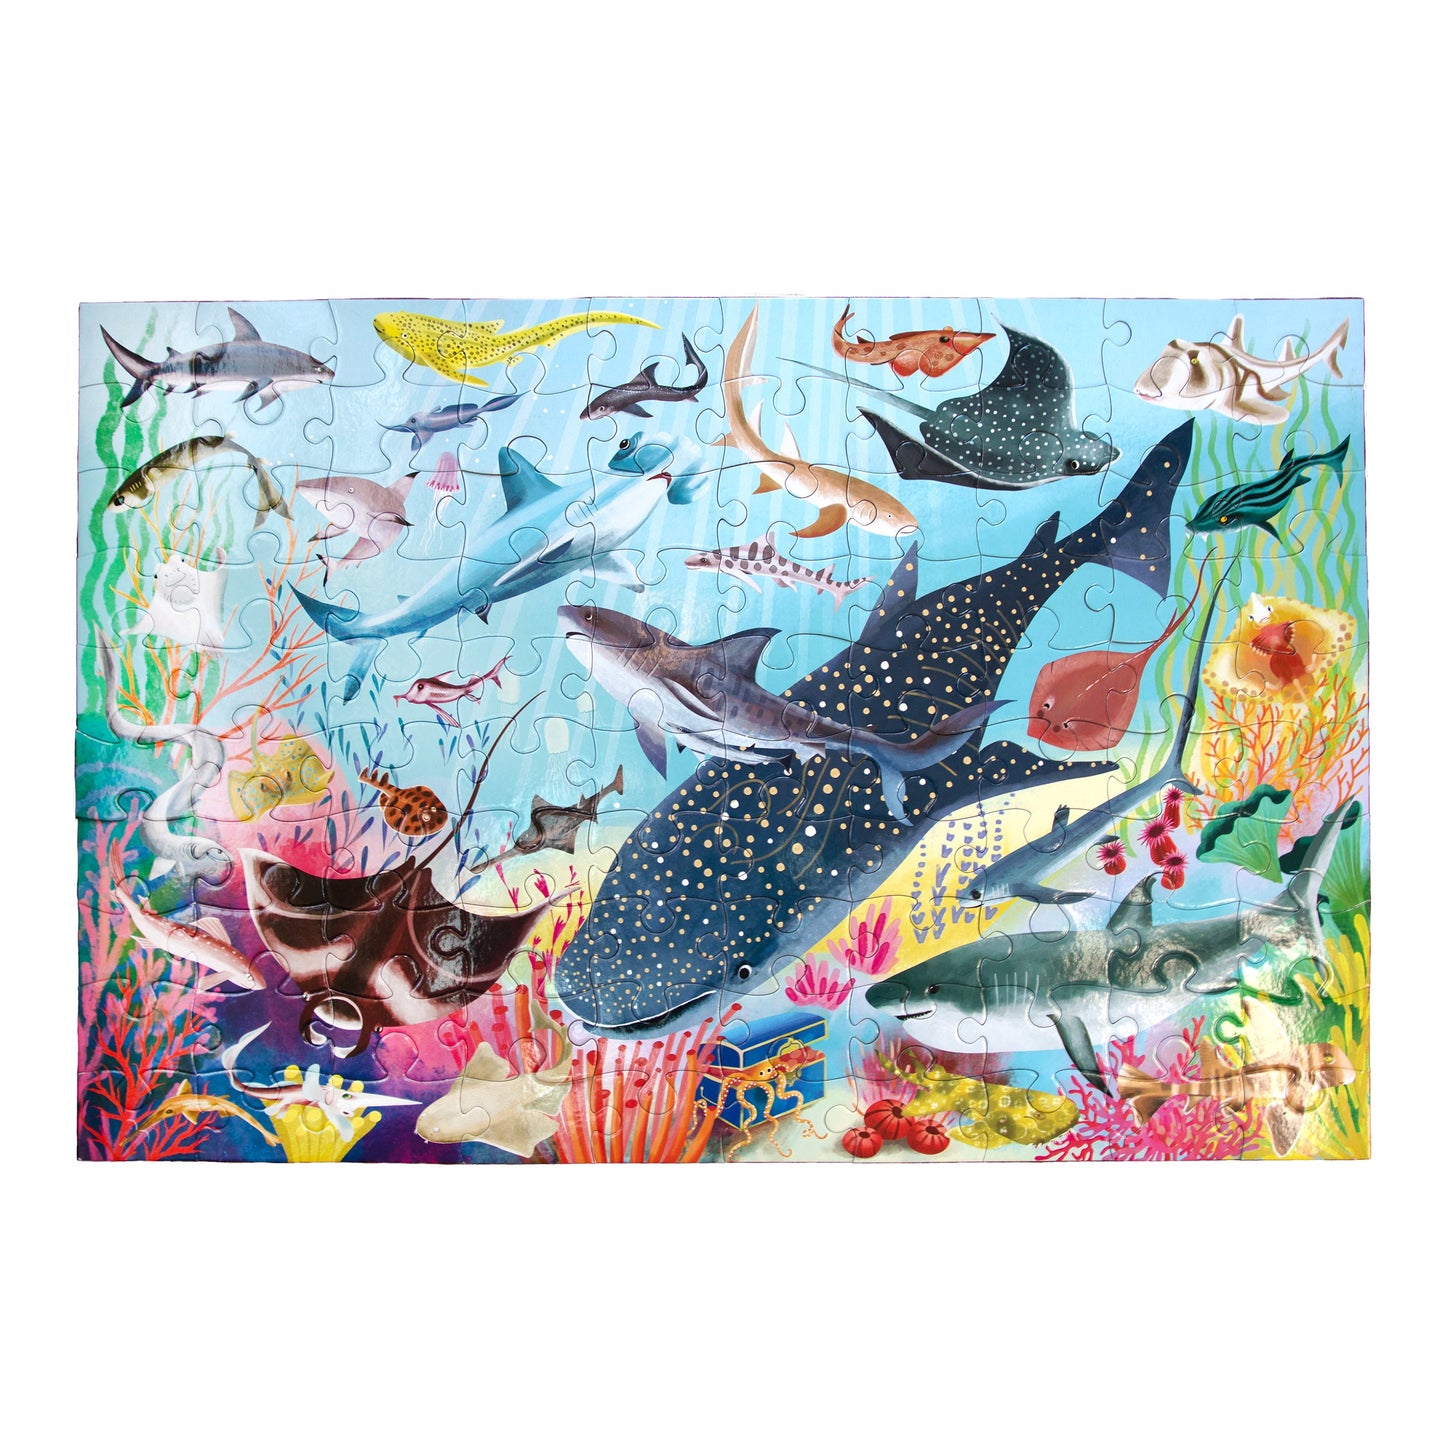 Love of Sharks 100 Piece Ocean Jigsaw Puzzle | Perfect Gift for Kids 5+ Swim with hammerheads, whale, stingrays, and great white sharks